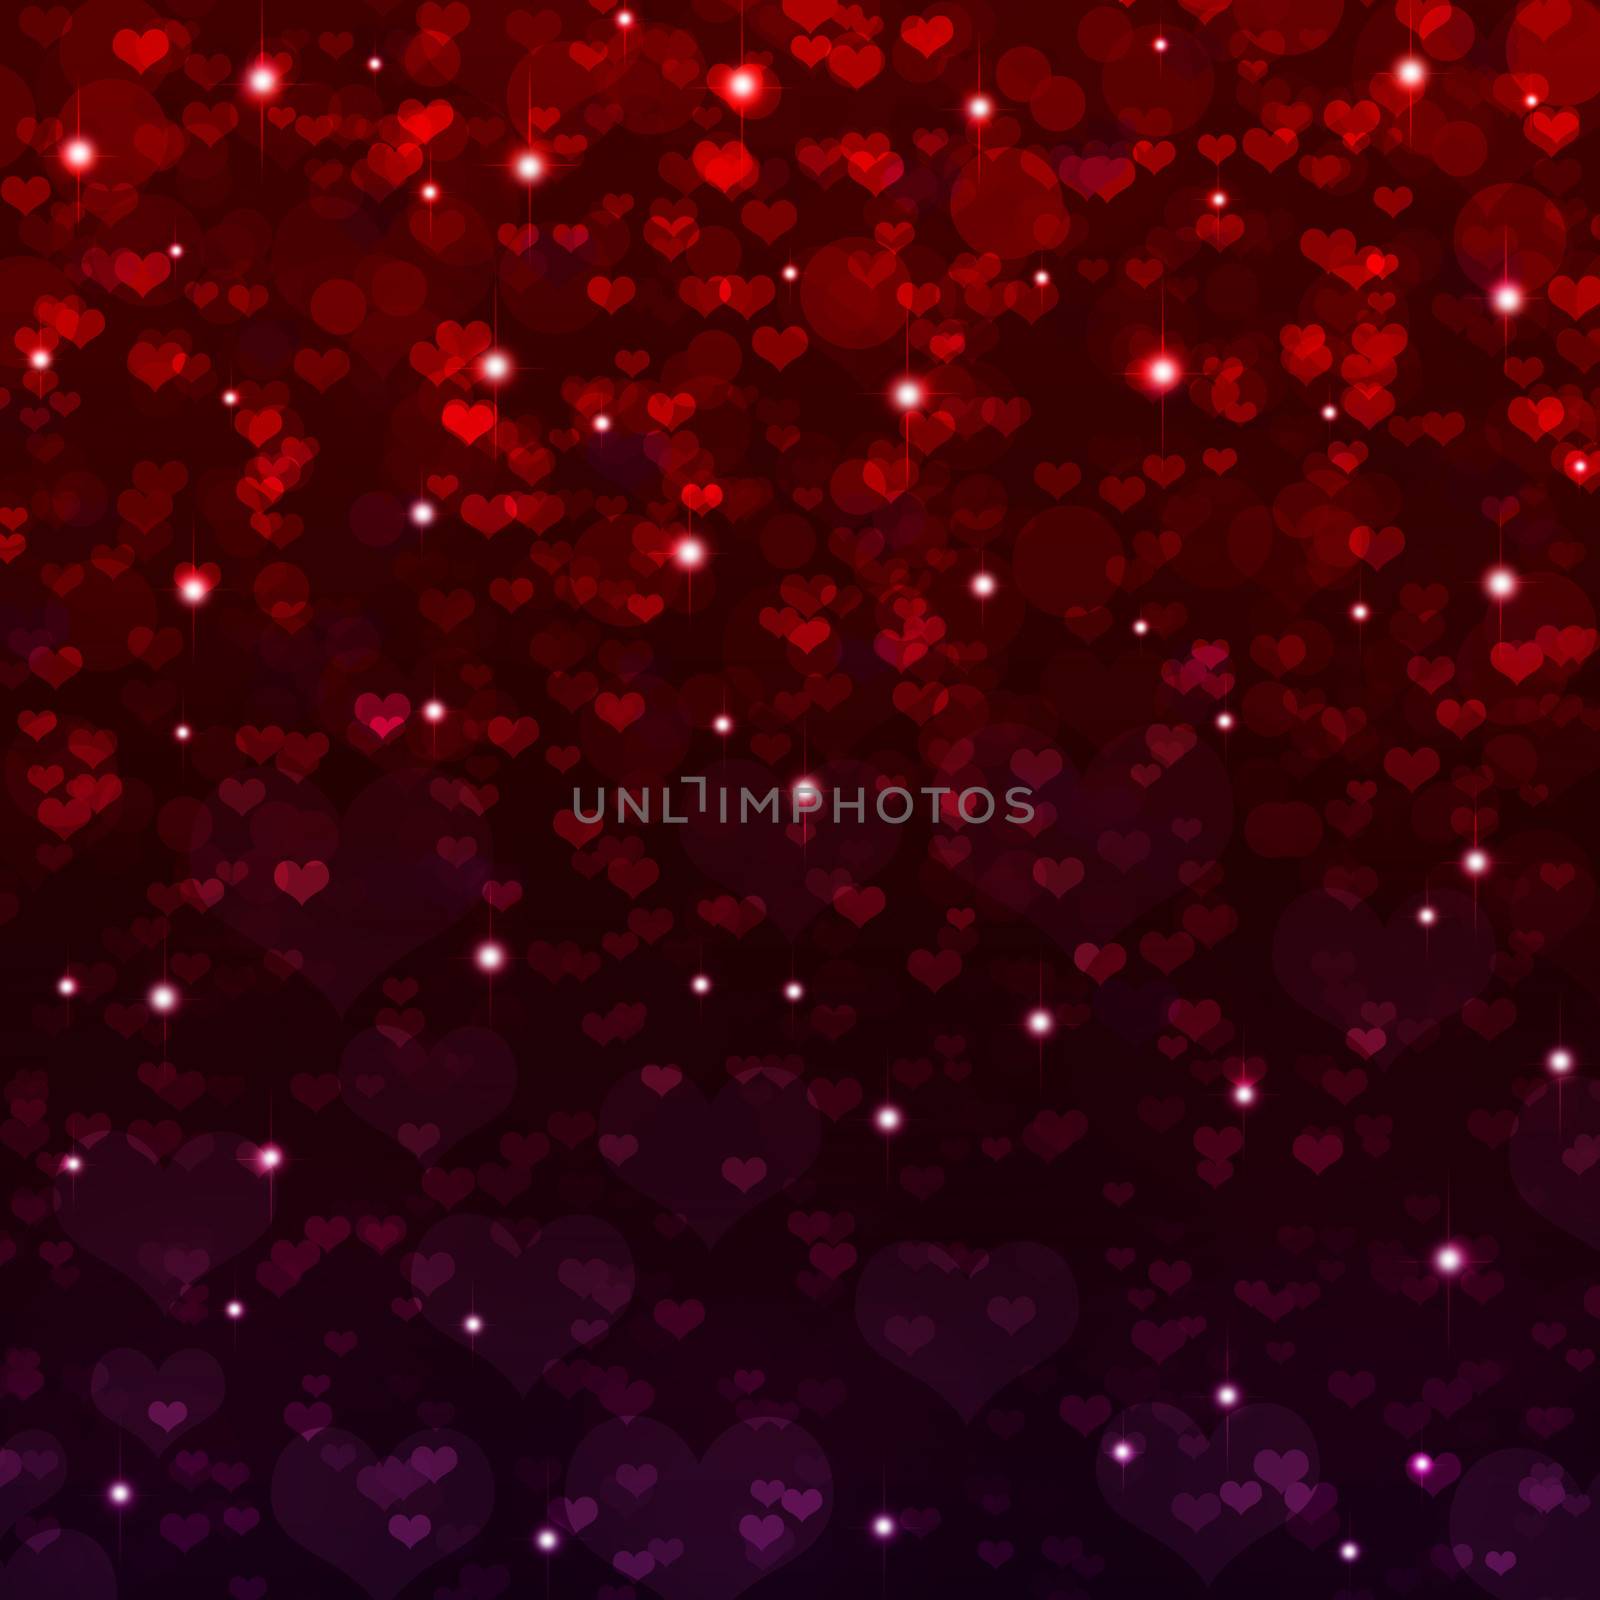 Abstract background of red hearts by cherezoff